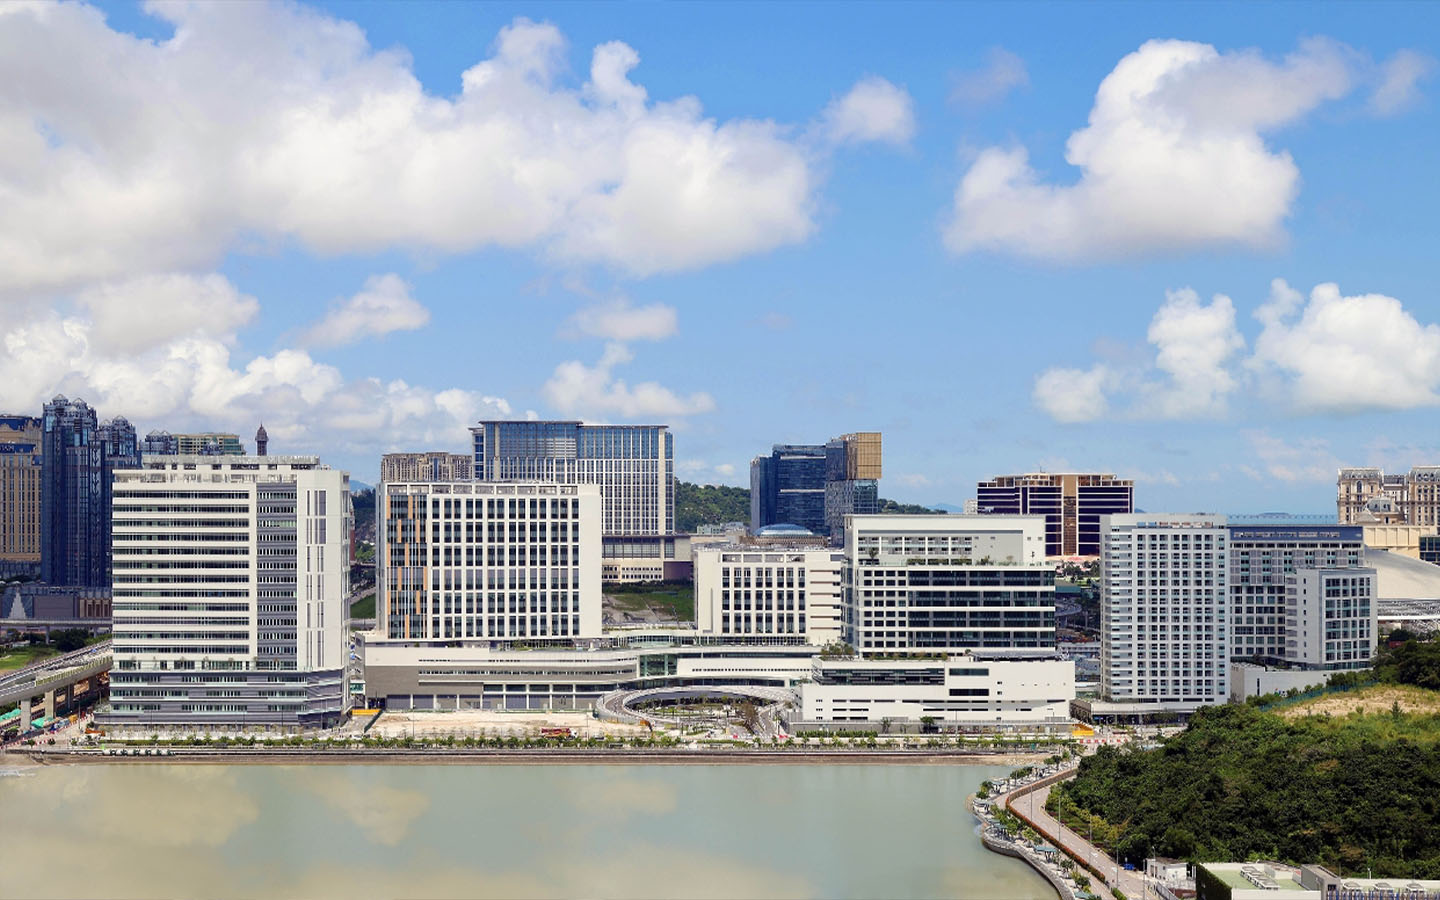 The Macao Union Hospital is a window into the promising future of healthcare in the SAR